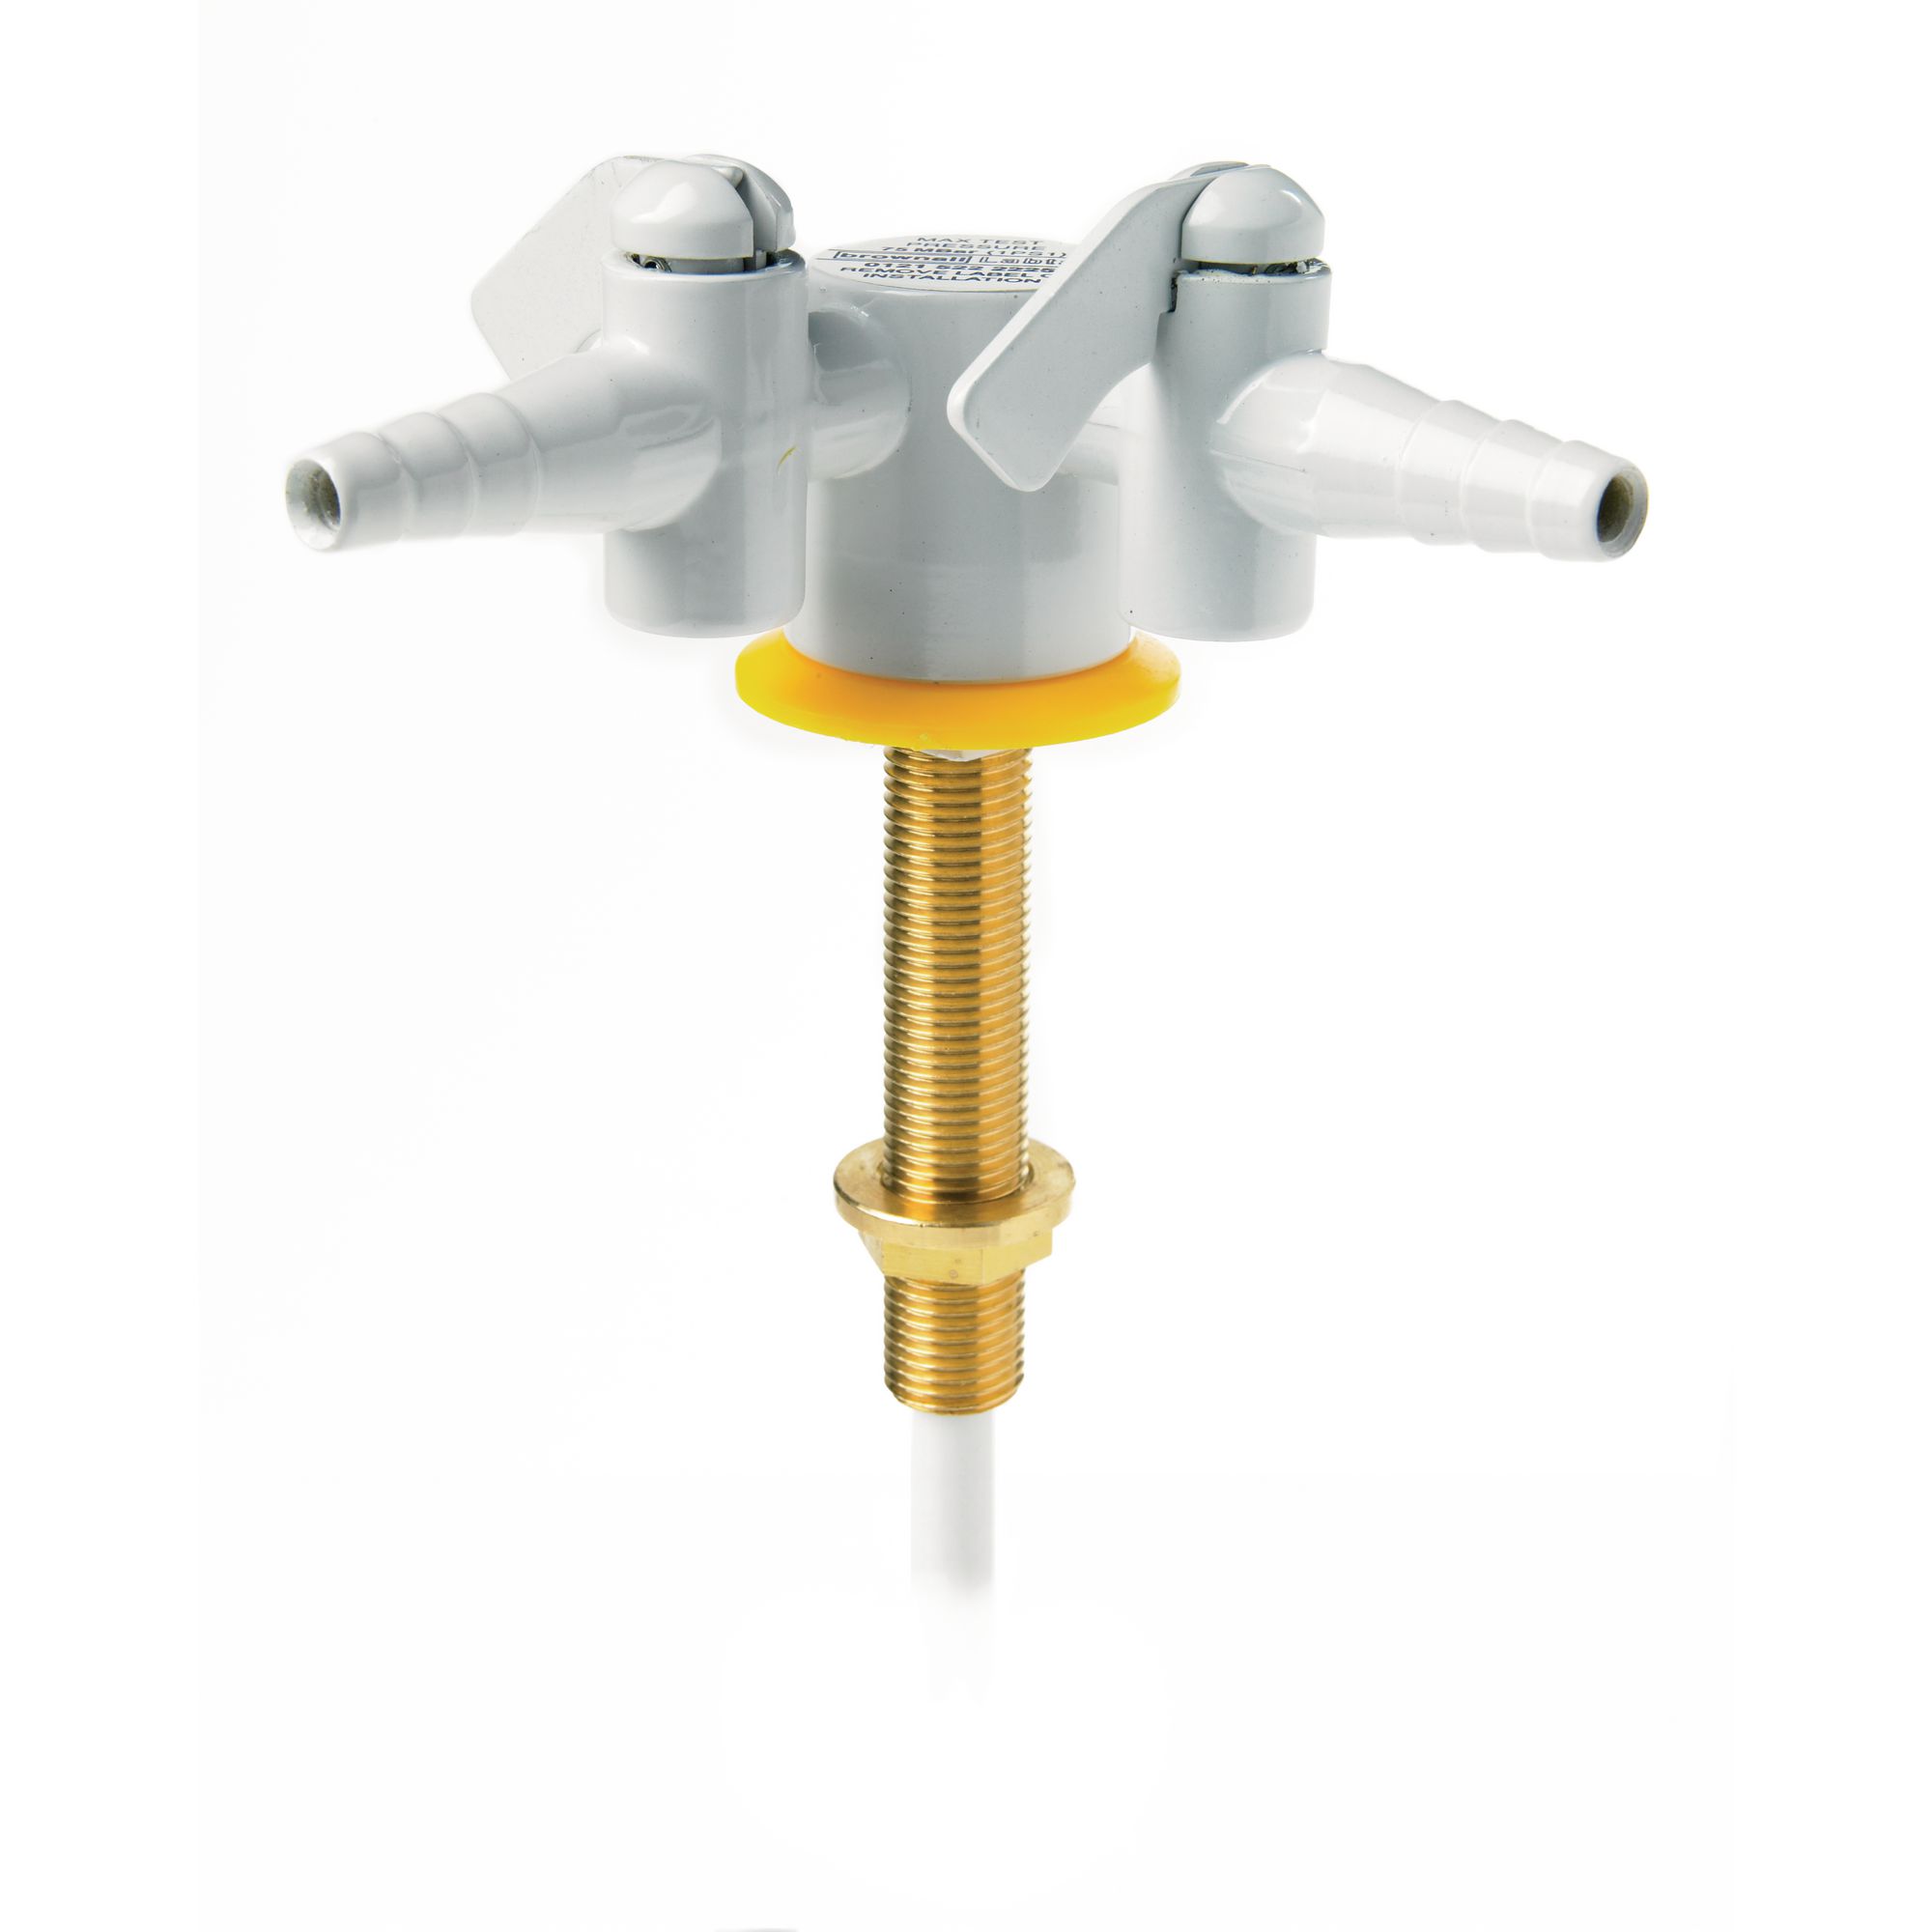 Drop Lever Gas Tap - 2 Way 90 Degrees